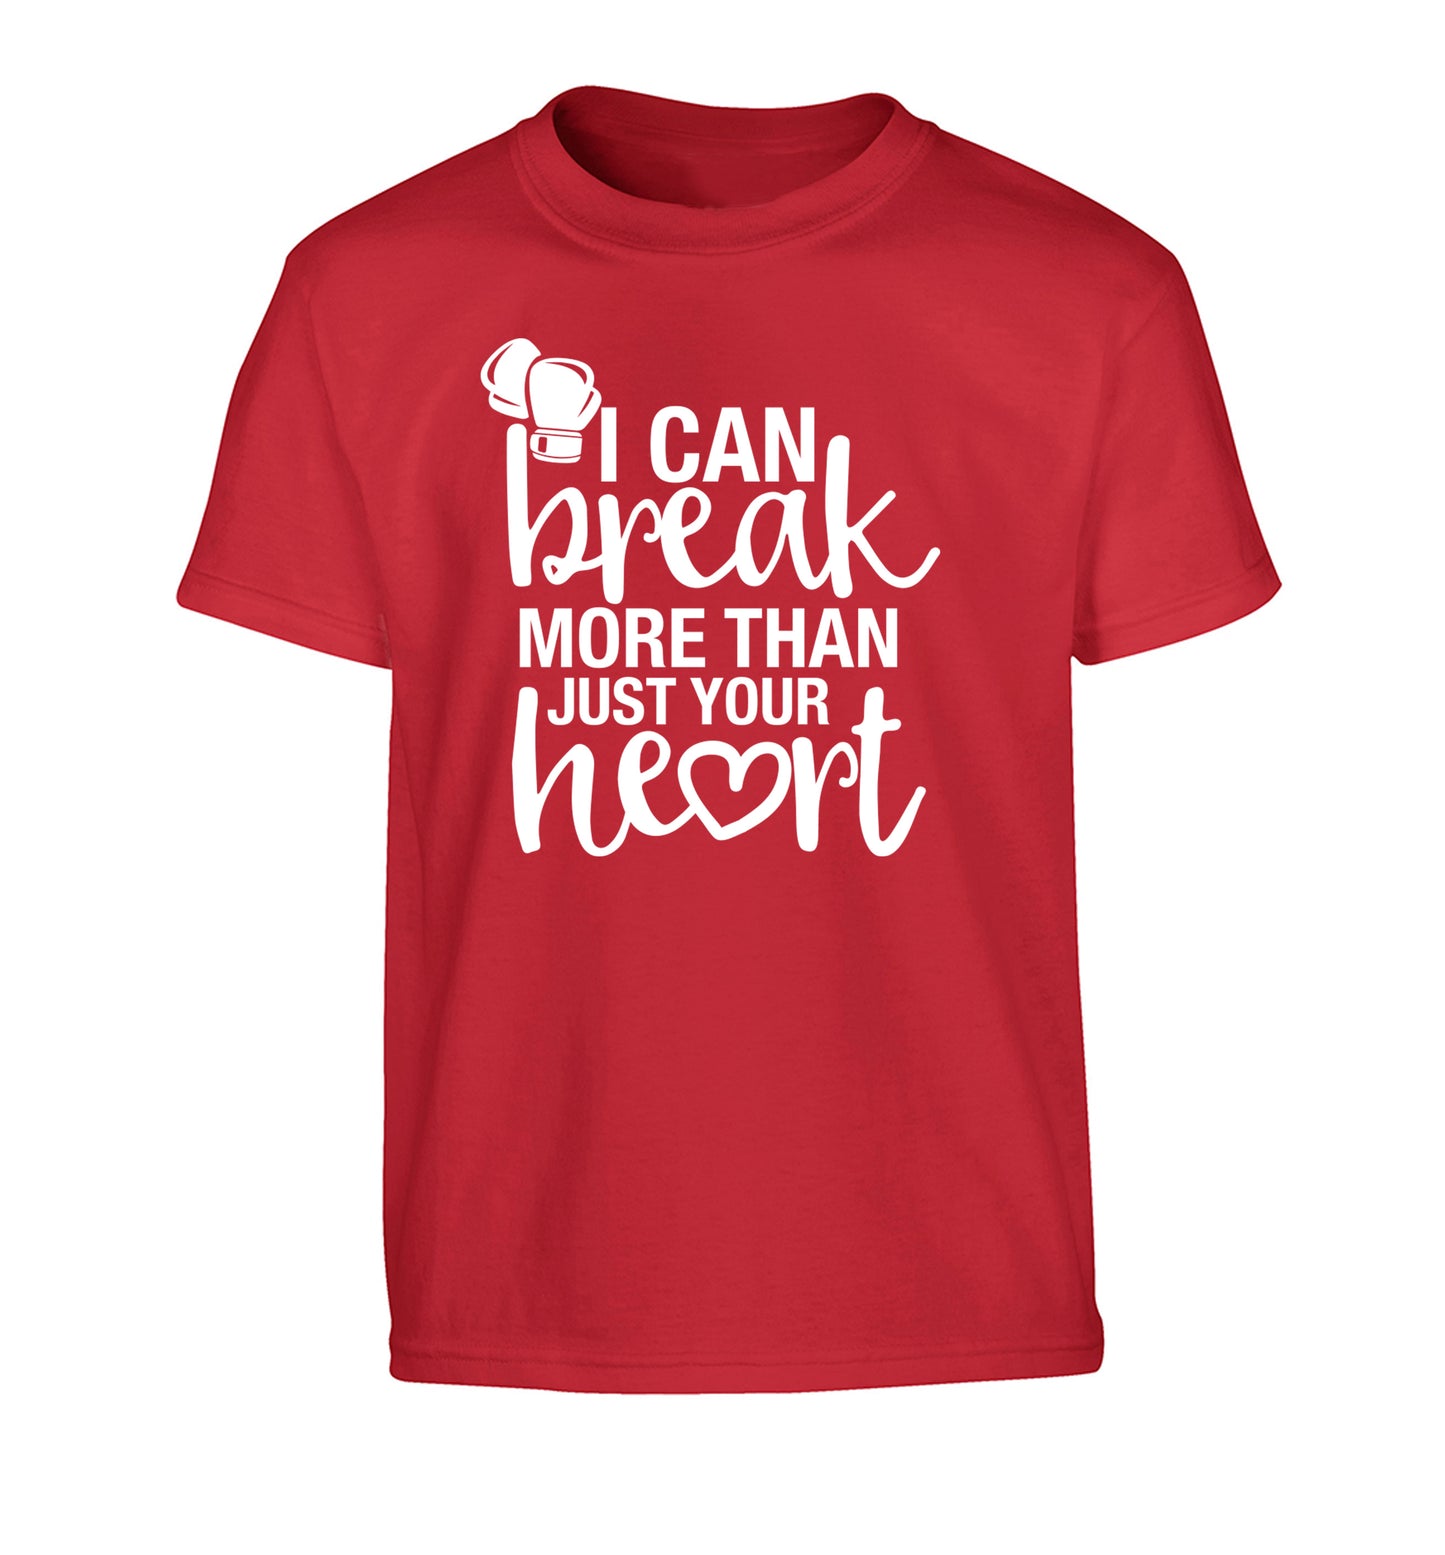 I can break more than just your heart Children's red Tshirt 12-13 Years